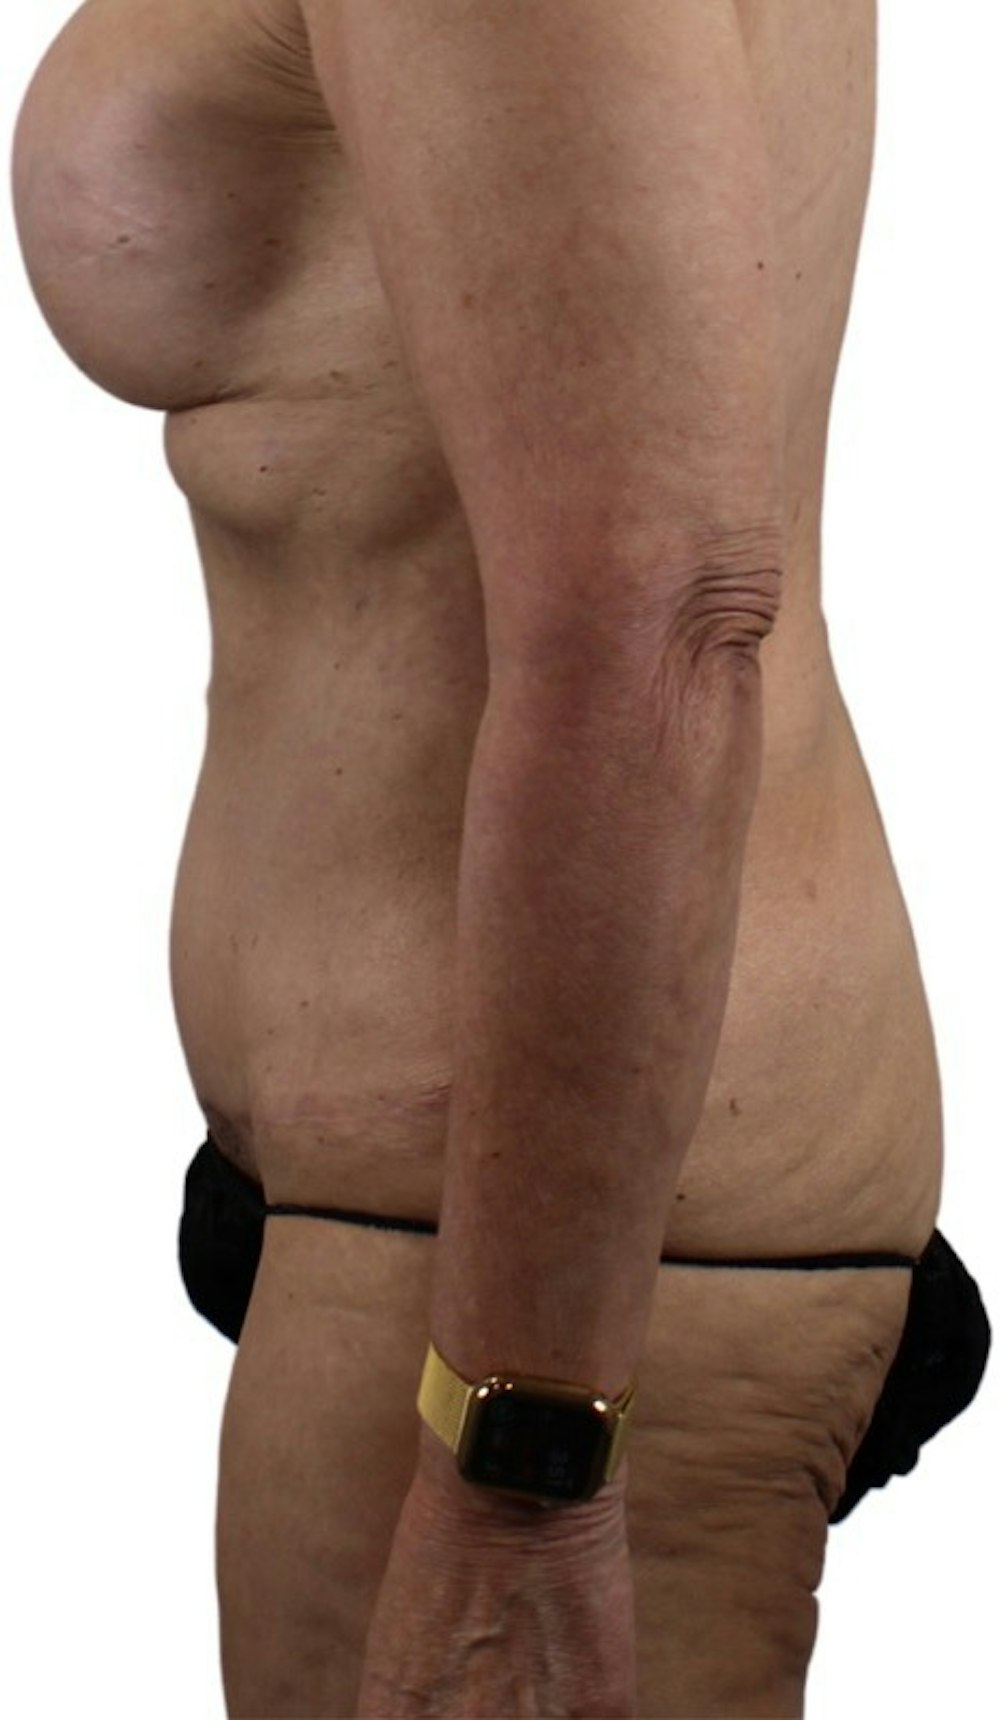 Abdominoplasty Before & After Gallery - Patient 13948276 - Image 4